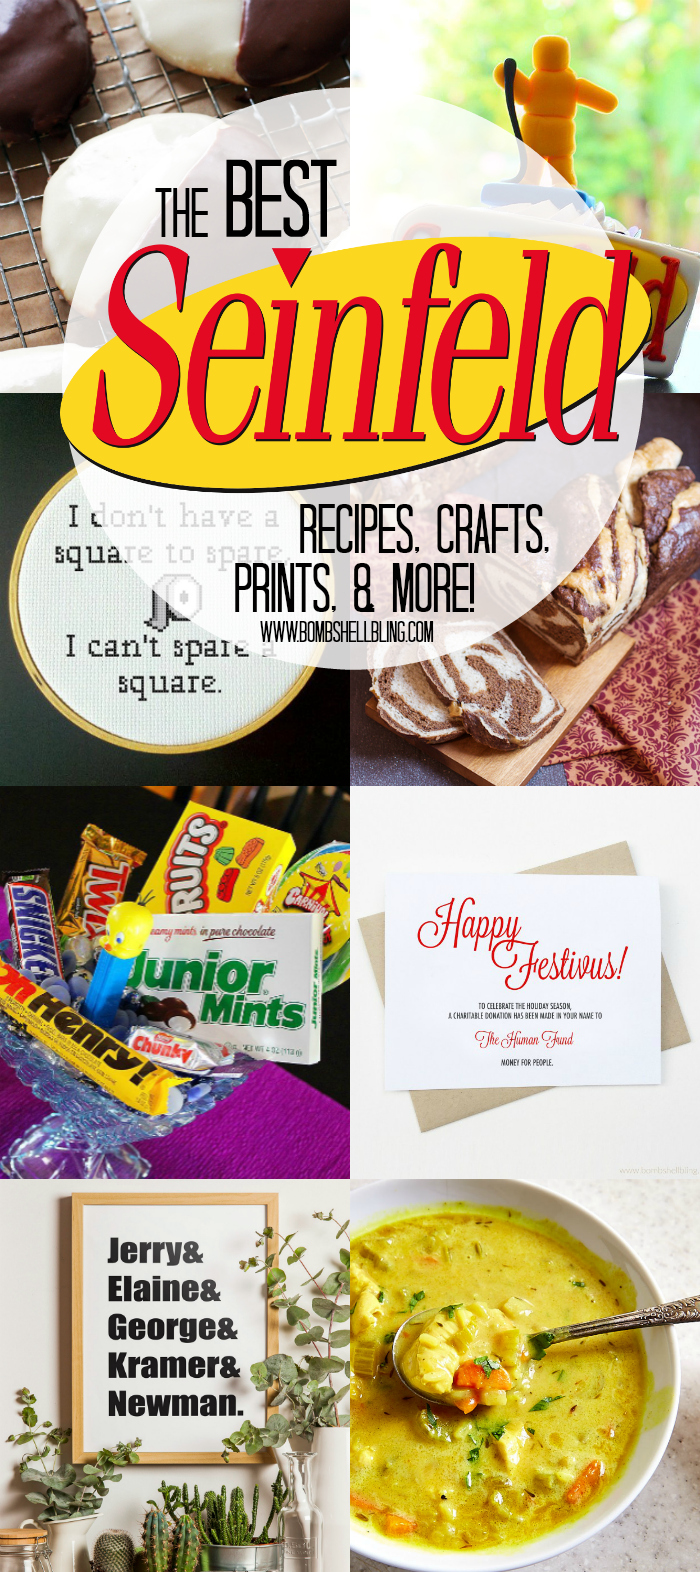 Here is a roundup of the very best Seinfeld recipes, crafts, printables, and more! Sure to make you giggle AND inspire you.